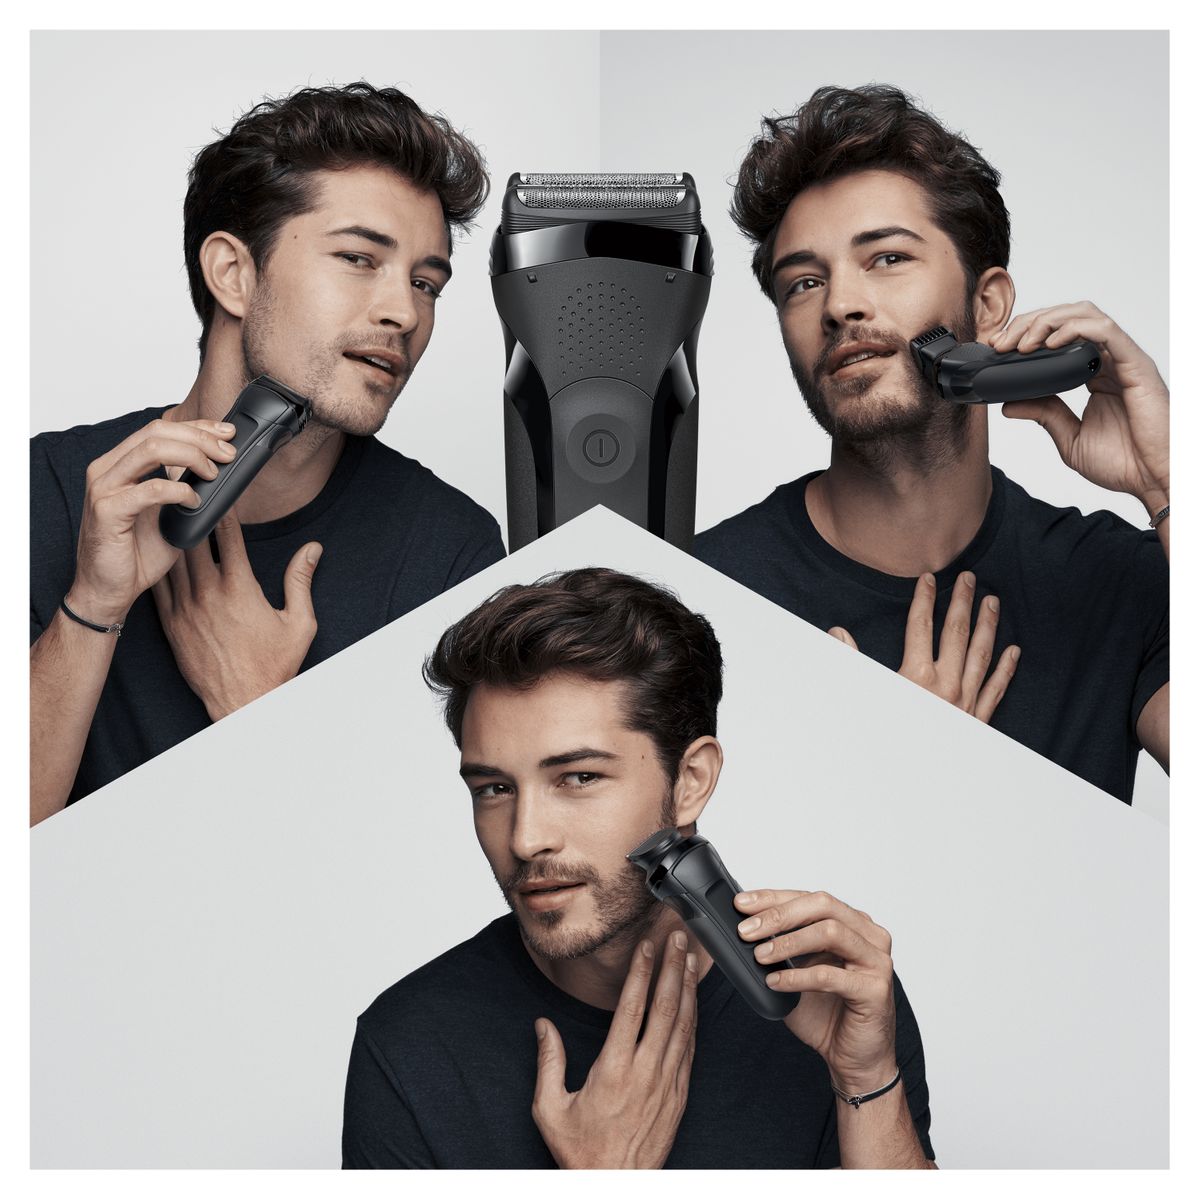 Braun Series 3 shaver men, 3-in-1 electric shaver, beard trimmer with 5 comb attachments, rechargeable and cordless electric shaver, 30 min run time, 300BT, black 300BT Shaver